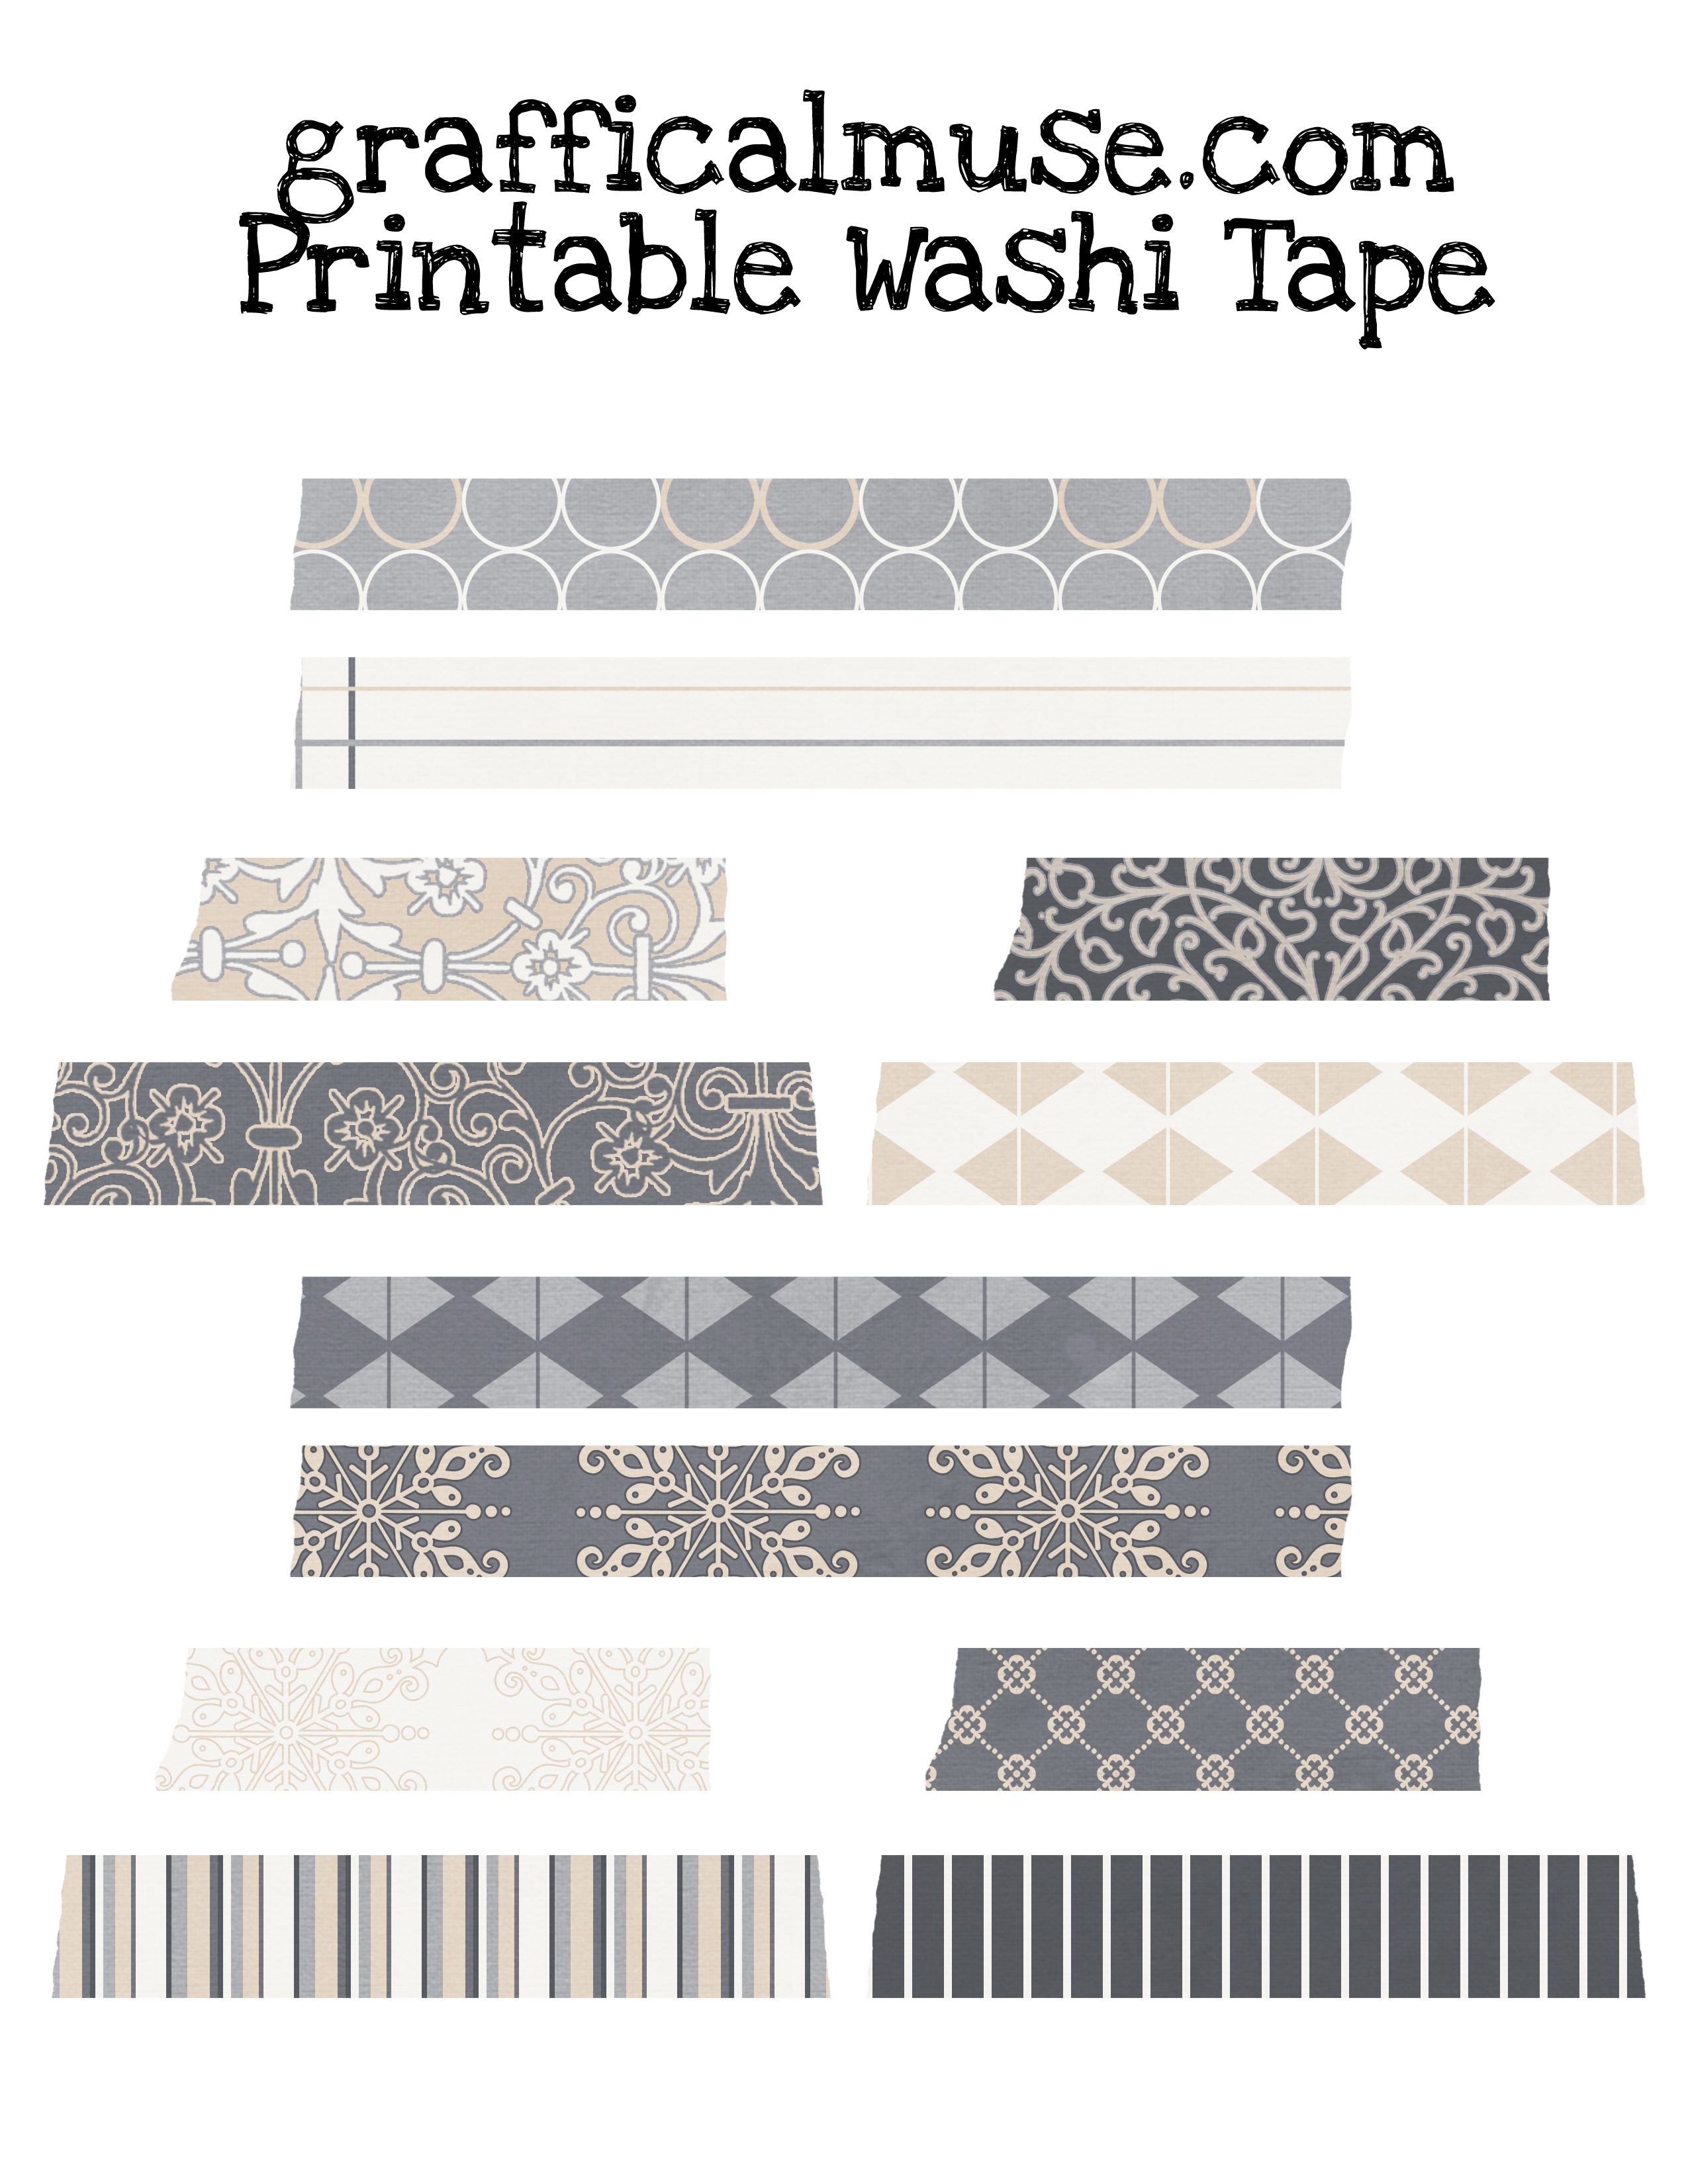 Free Printable Washi Tape - Neutral Patterns - The Graffical Muse - Free Printable Washi Tape